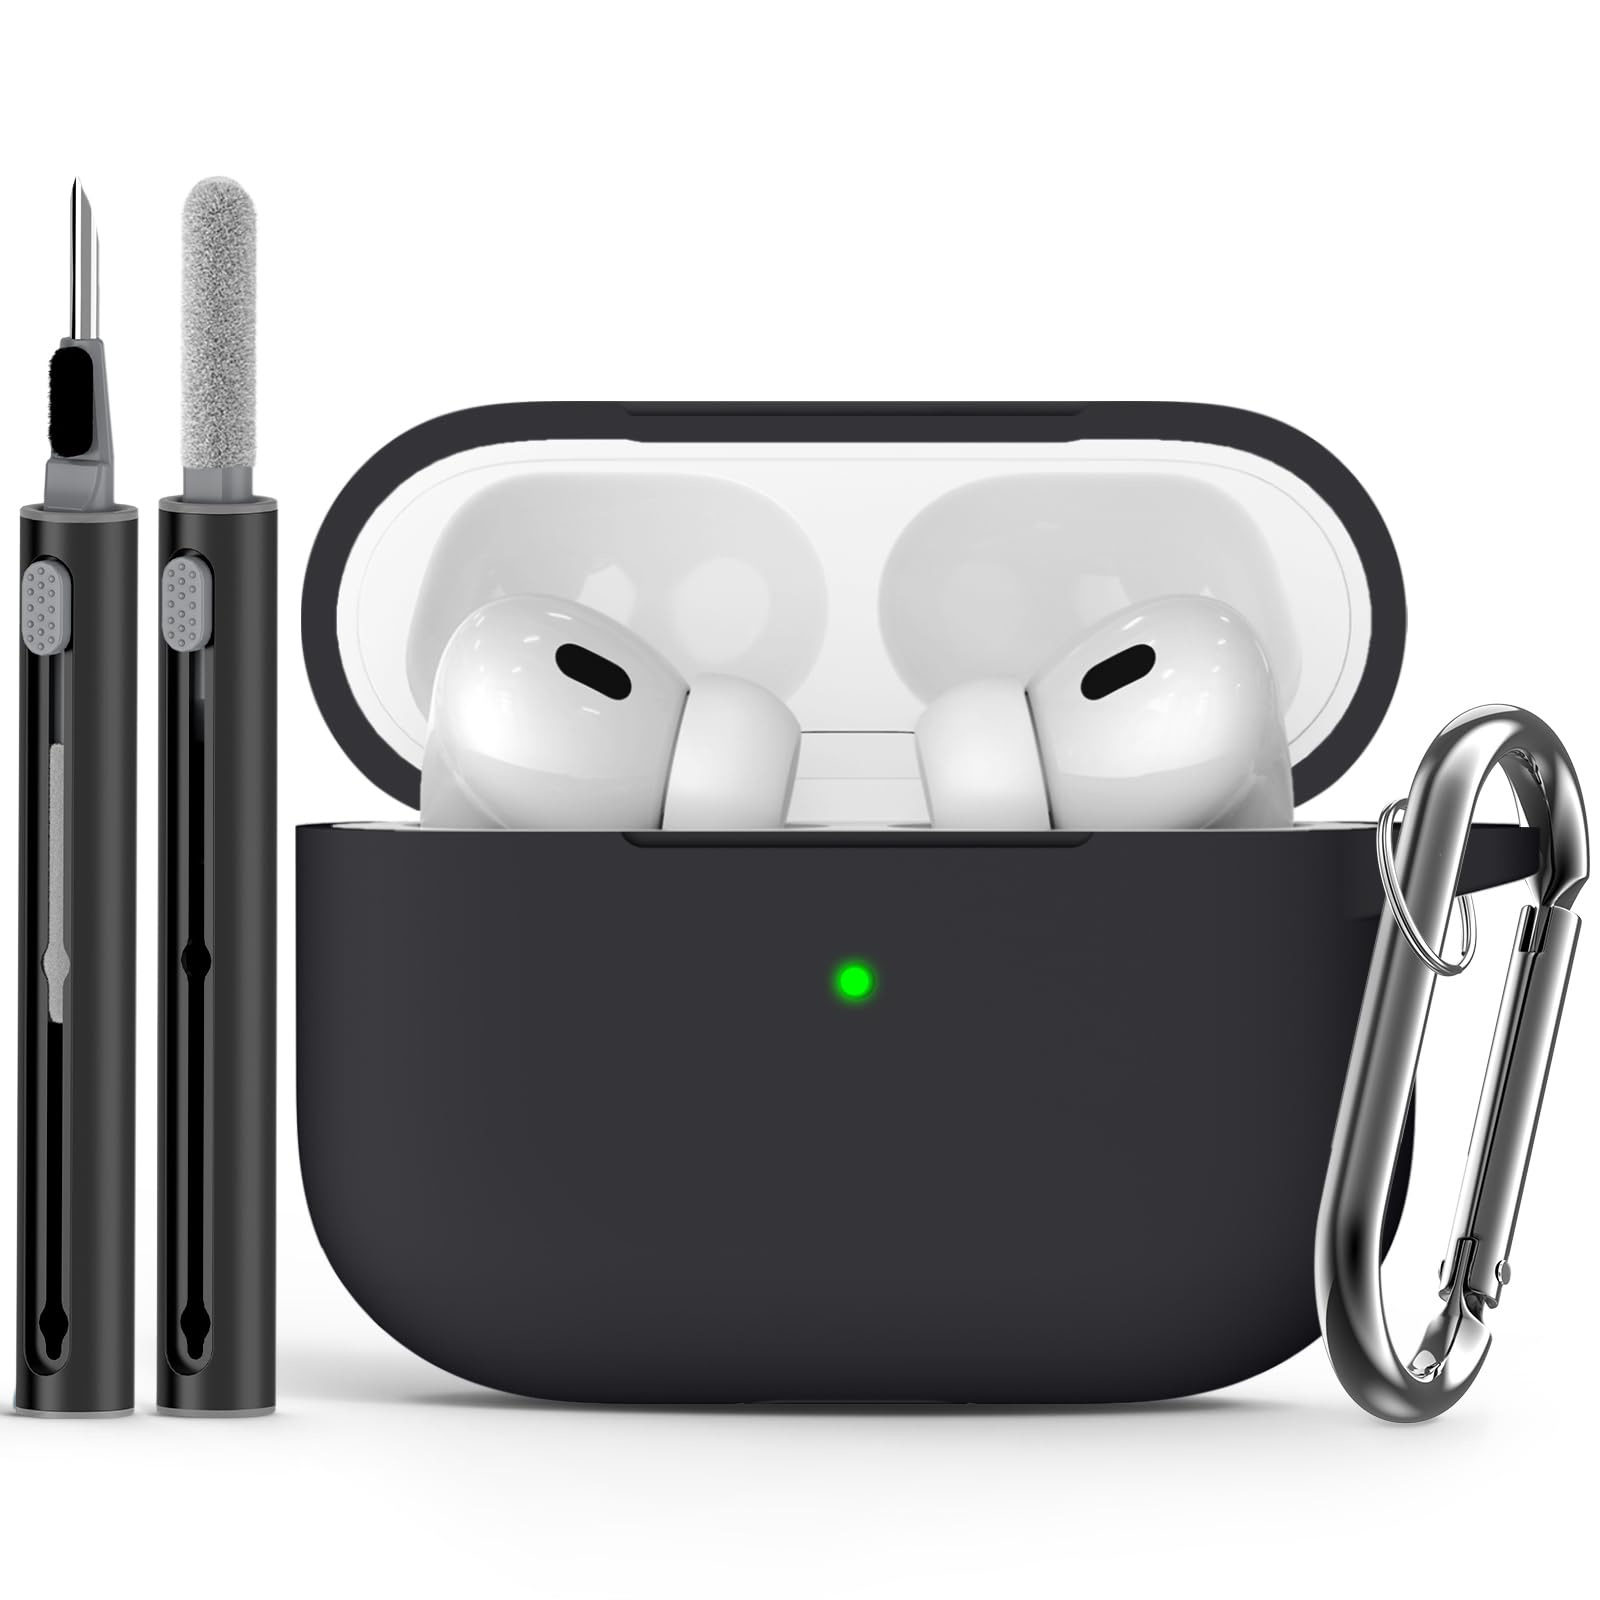 Ljusmicker AirPods Pro Case Cover with Cleaner Kit,Soft Silicone Protective Case for Apple AirPod Pro 2nd/1st Generation Case for Women Men,AirPods Pro 2/Pro Case Accessories with Keychain-Black